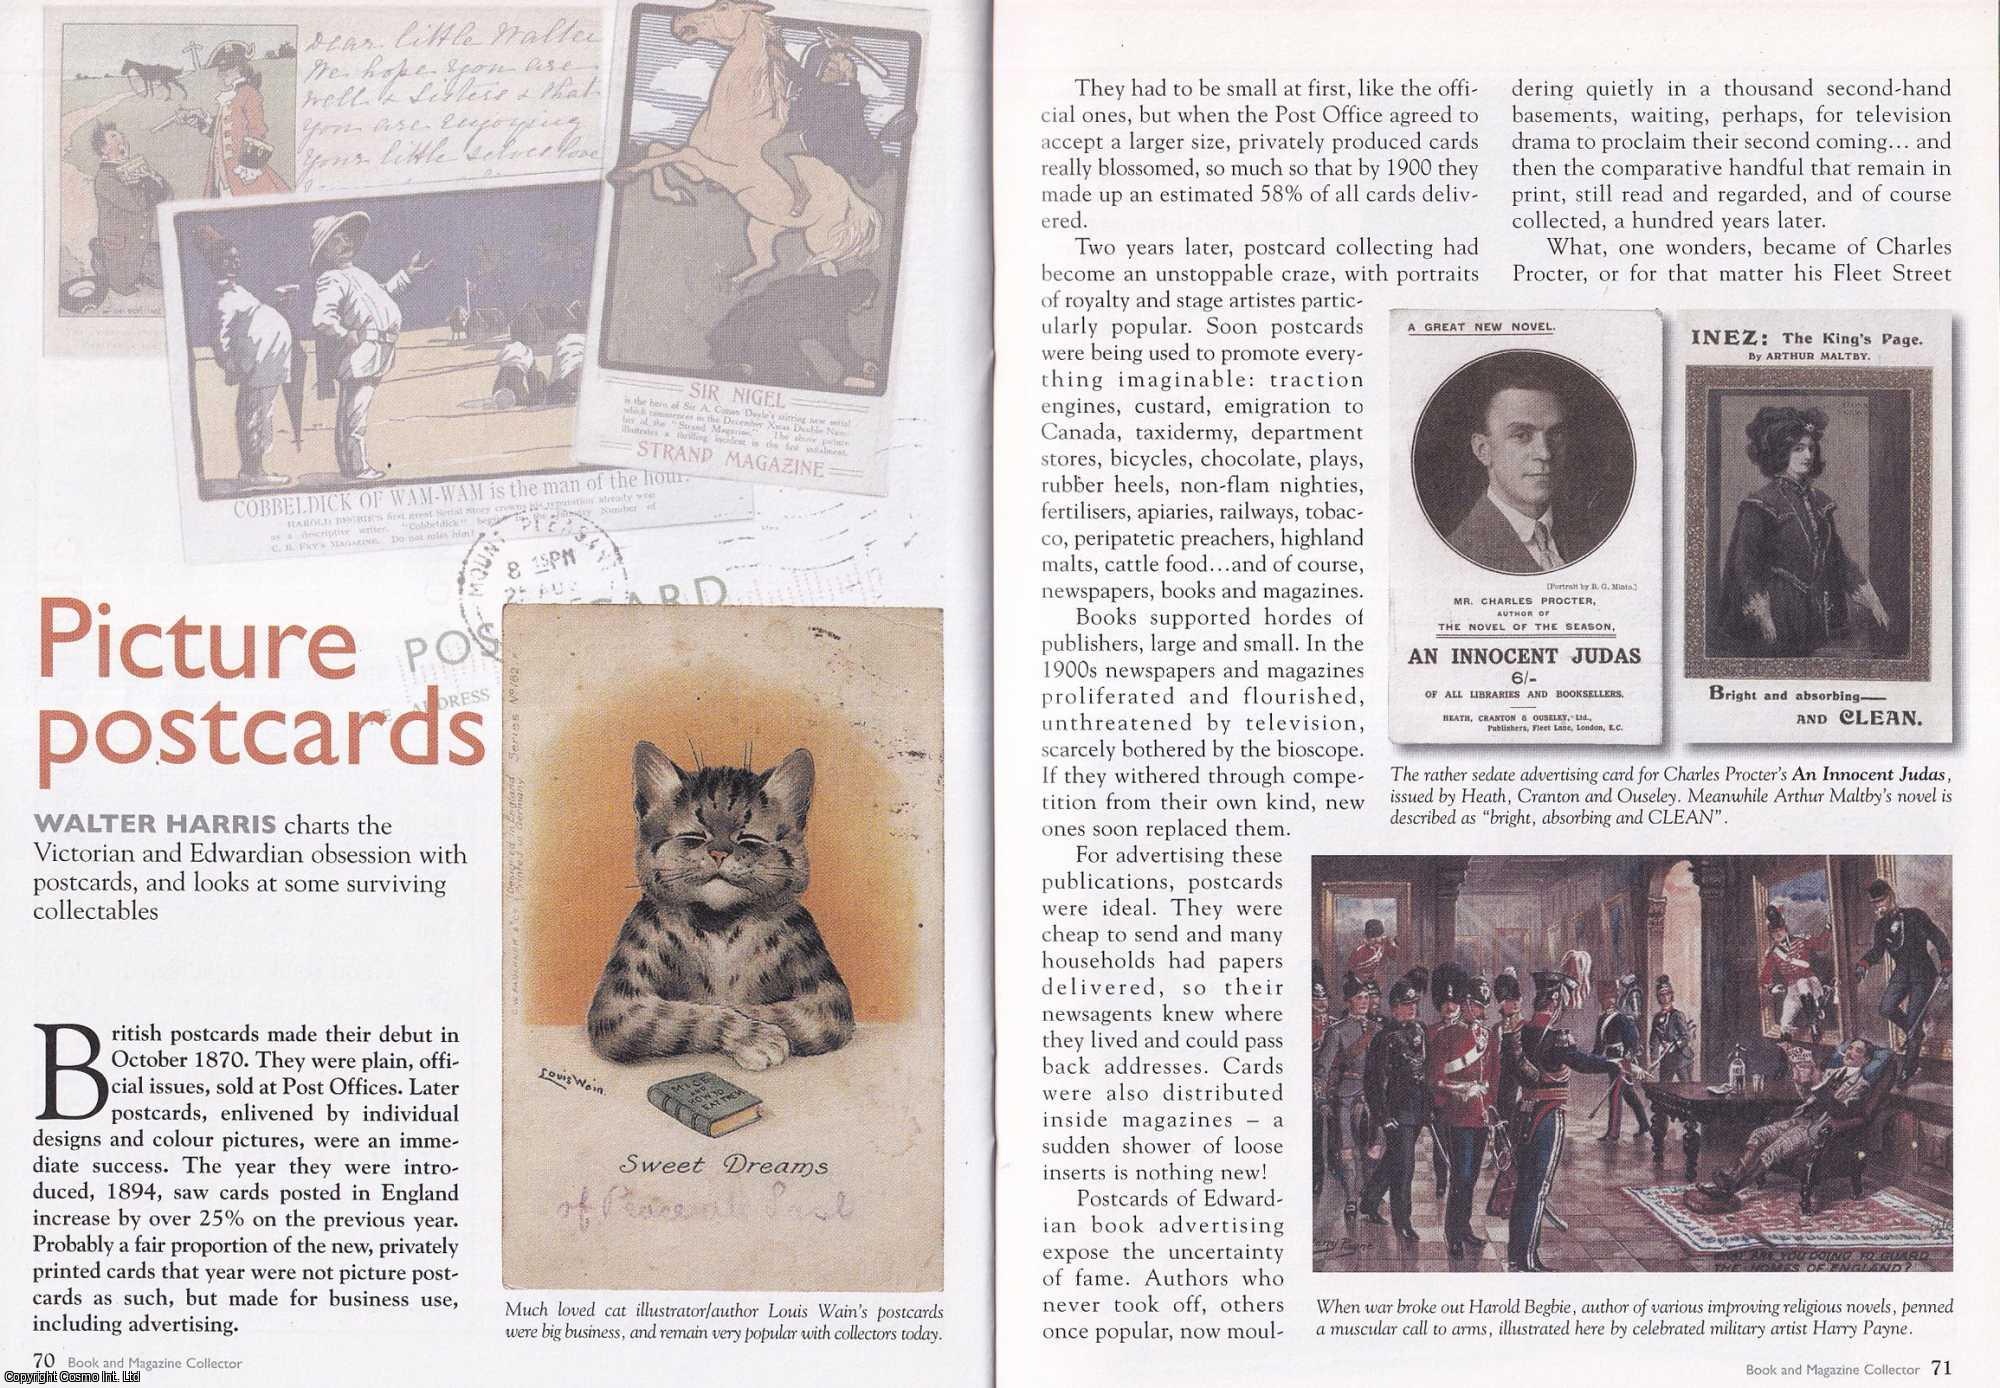 Walter Harris - Picture Postcards. Charting The Victorian and Edwardian Obsession with Postcards. This is an original article separated from an issue of The Book & Magazine Collector publication.